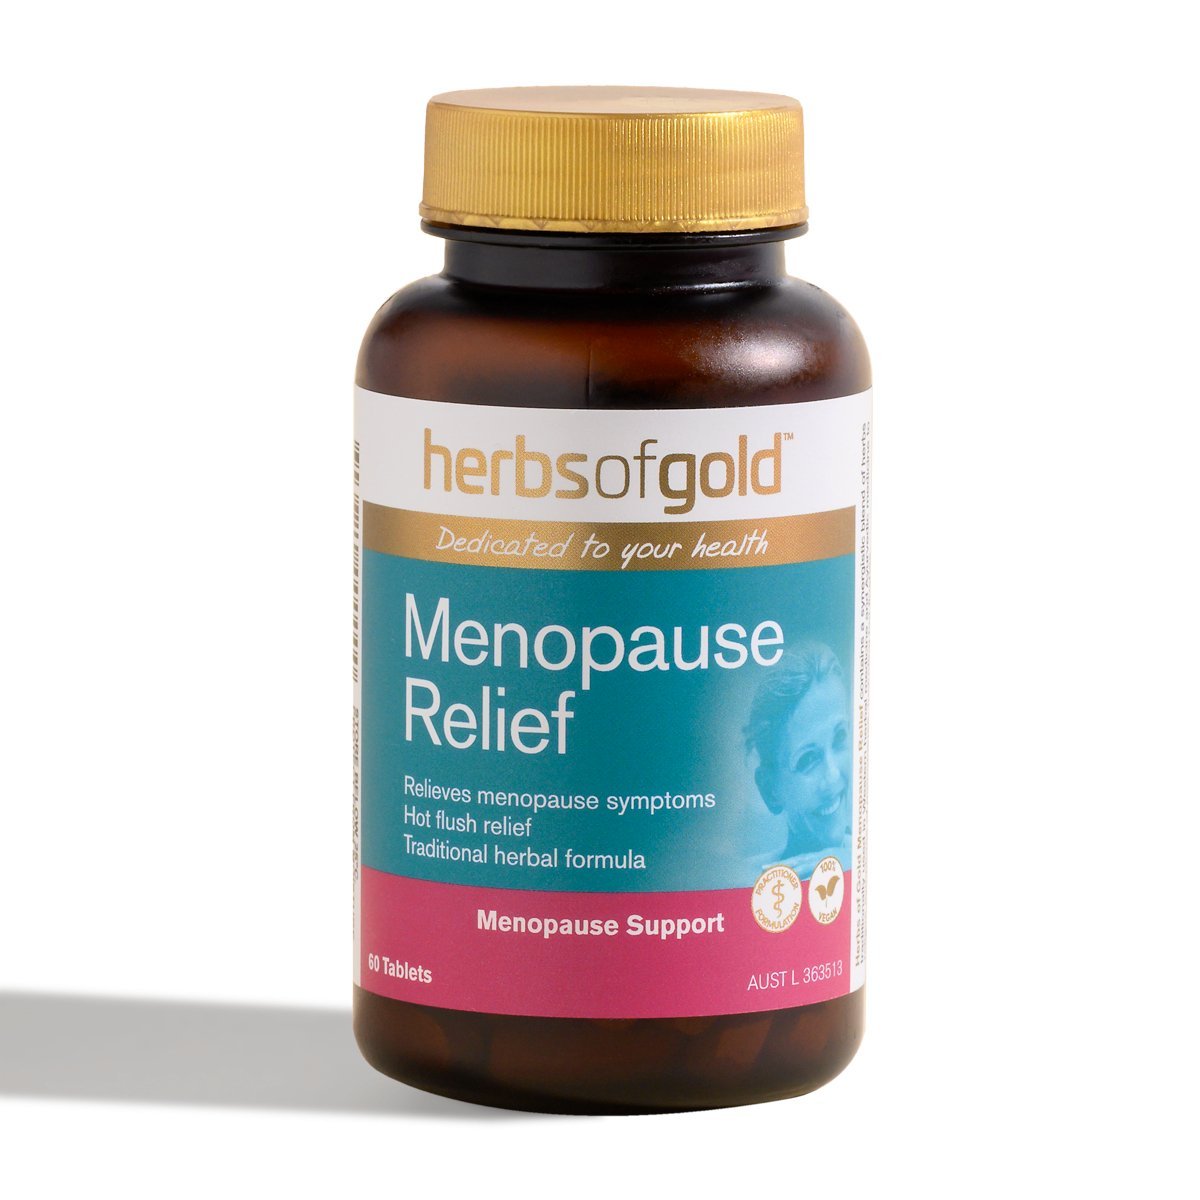 Herbs of Gold Menopause Relief - Dr Earth - Supplements, Women's Health